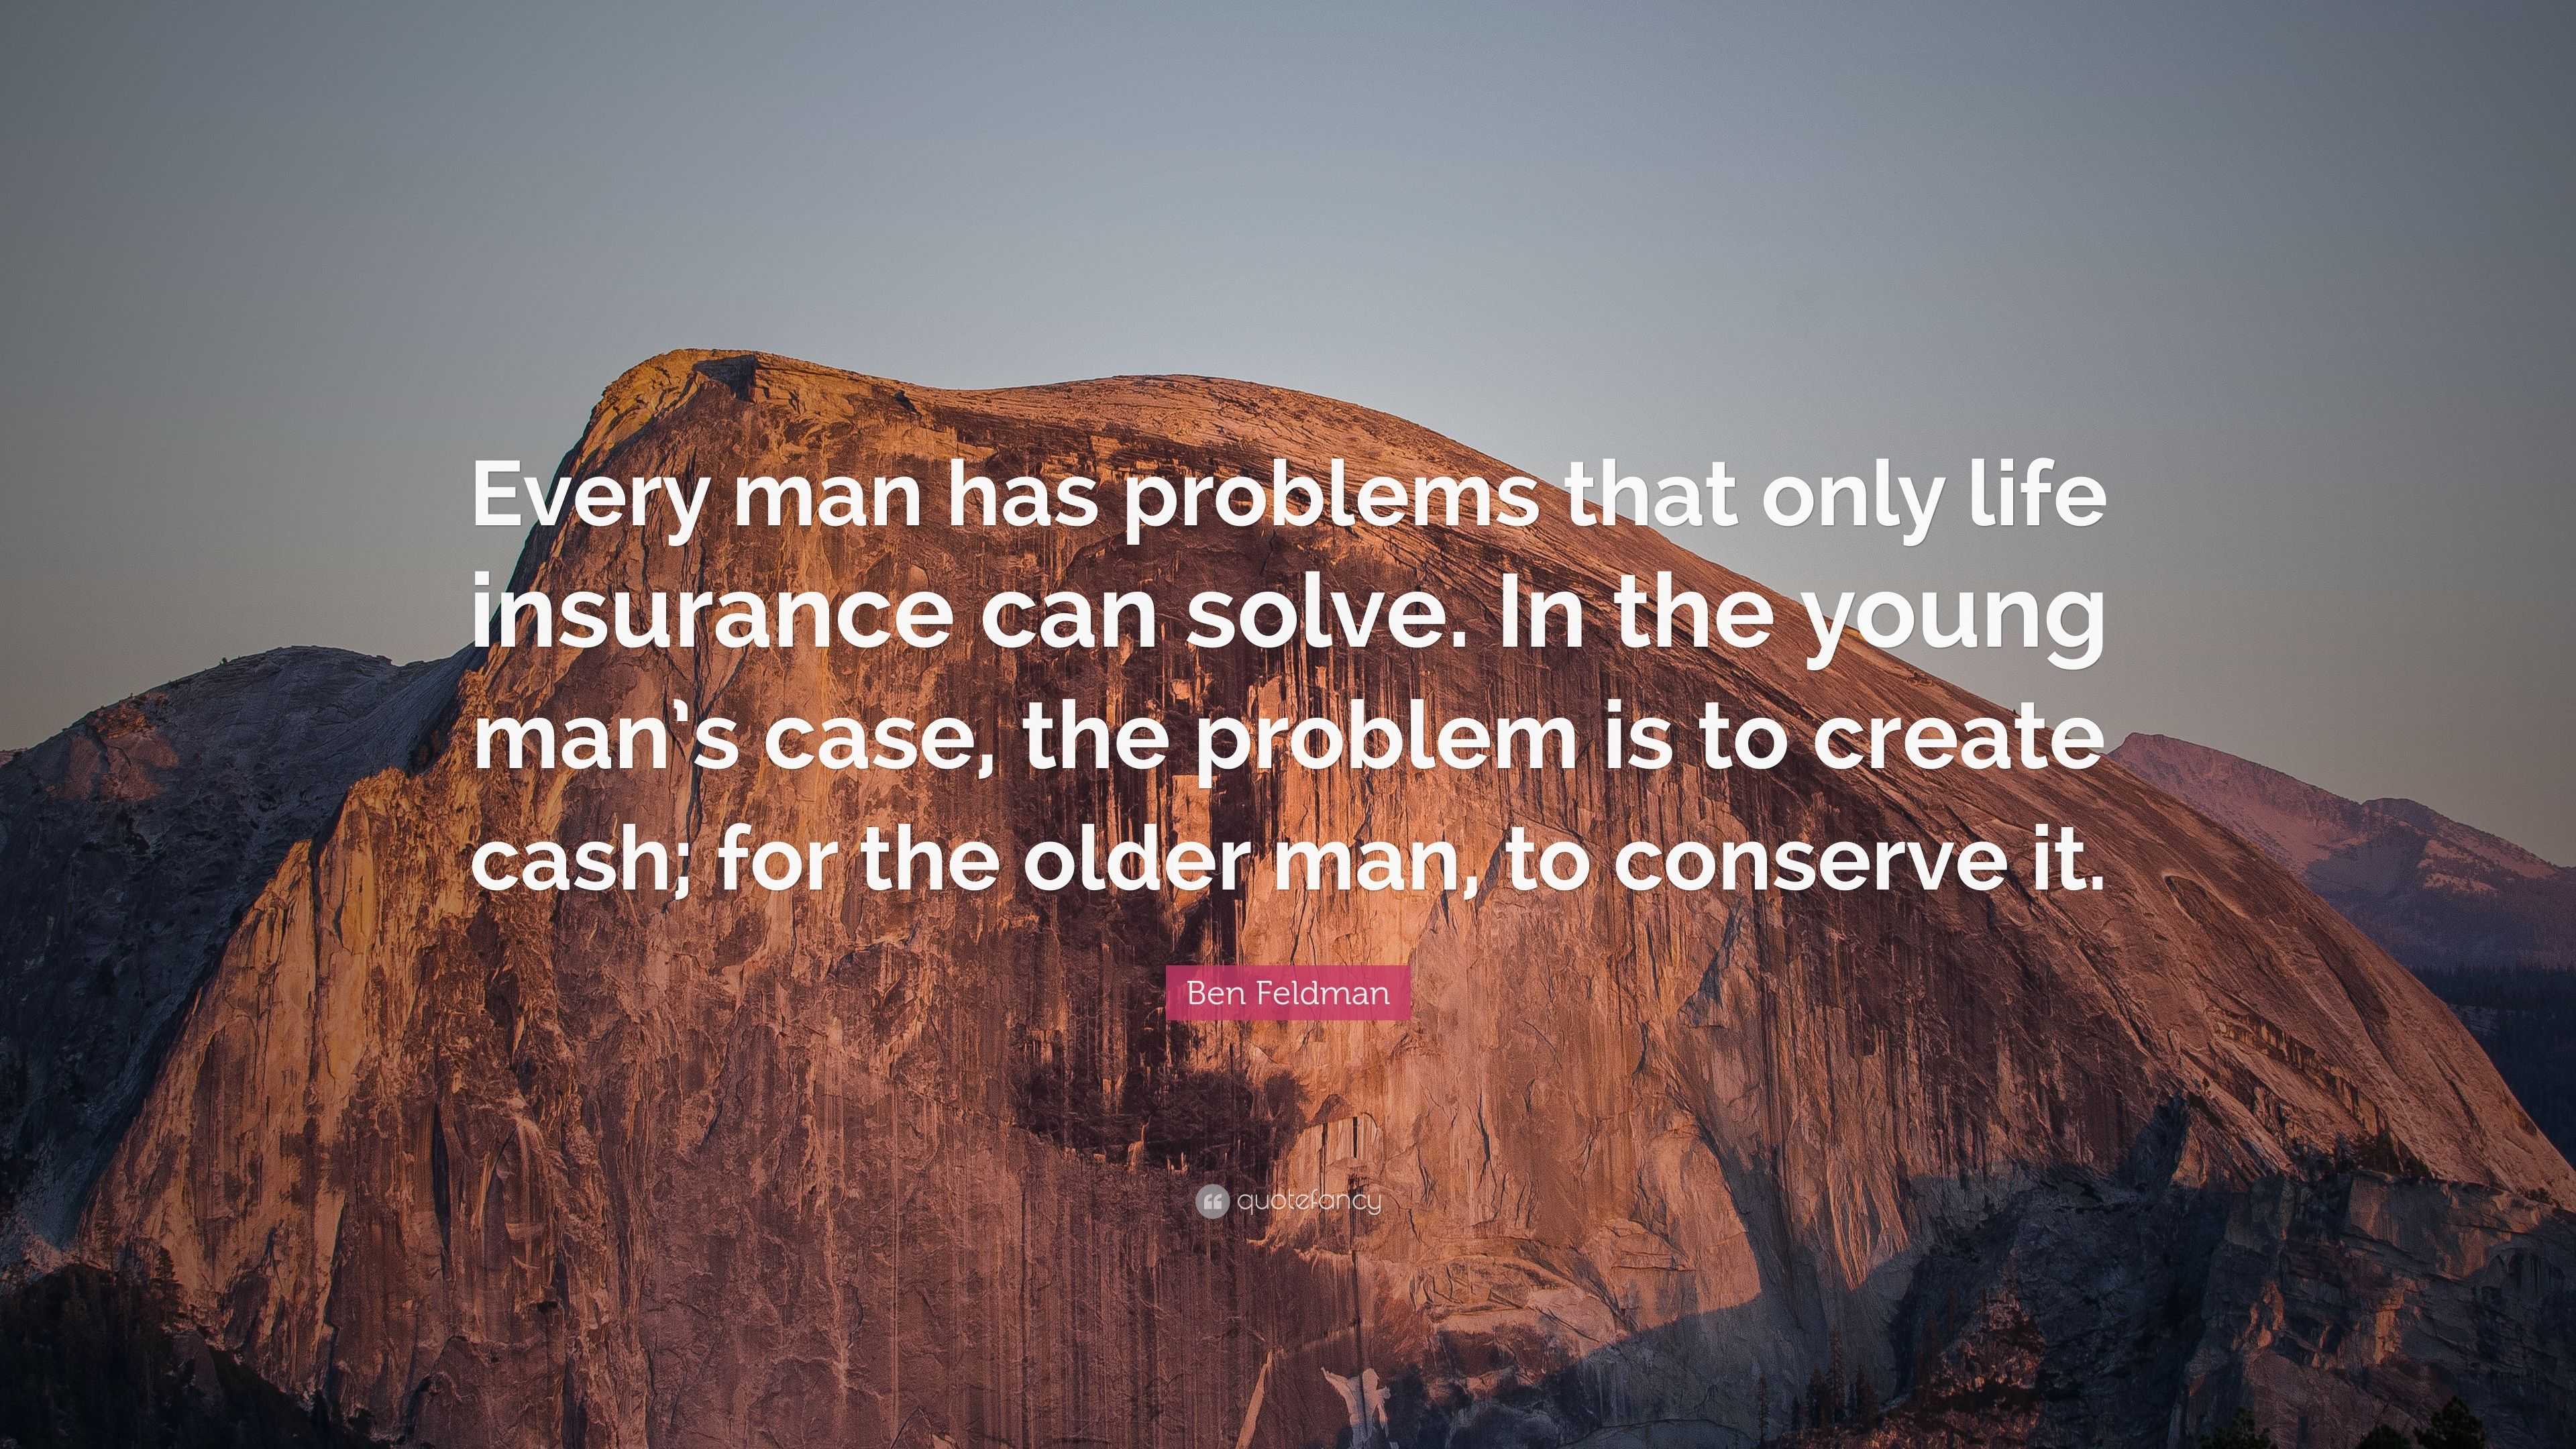 Ben Feldman Quote “Every man has problems that only life insurance can solve